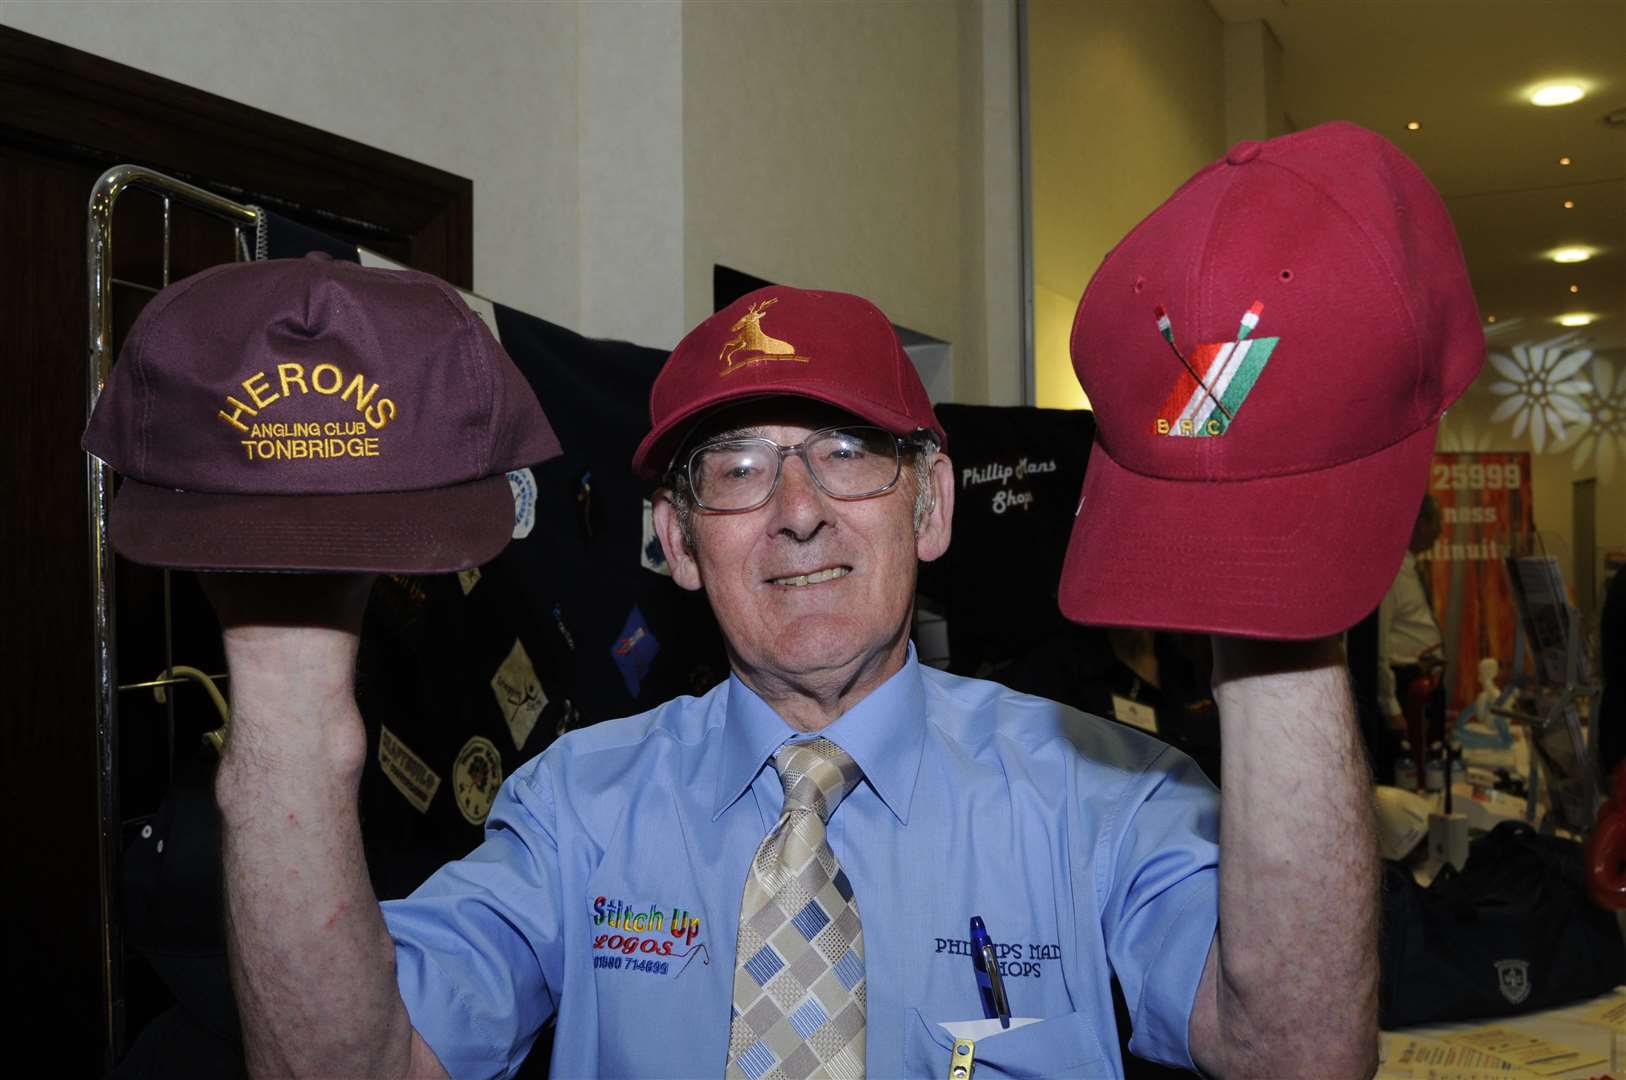 Phil Mummery at a business exhibition at the Ashford International Hotel with his promotional caps